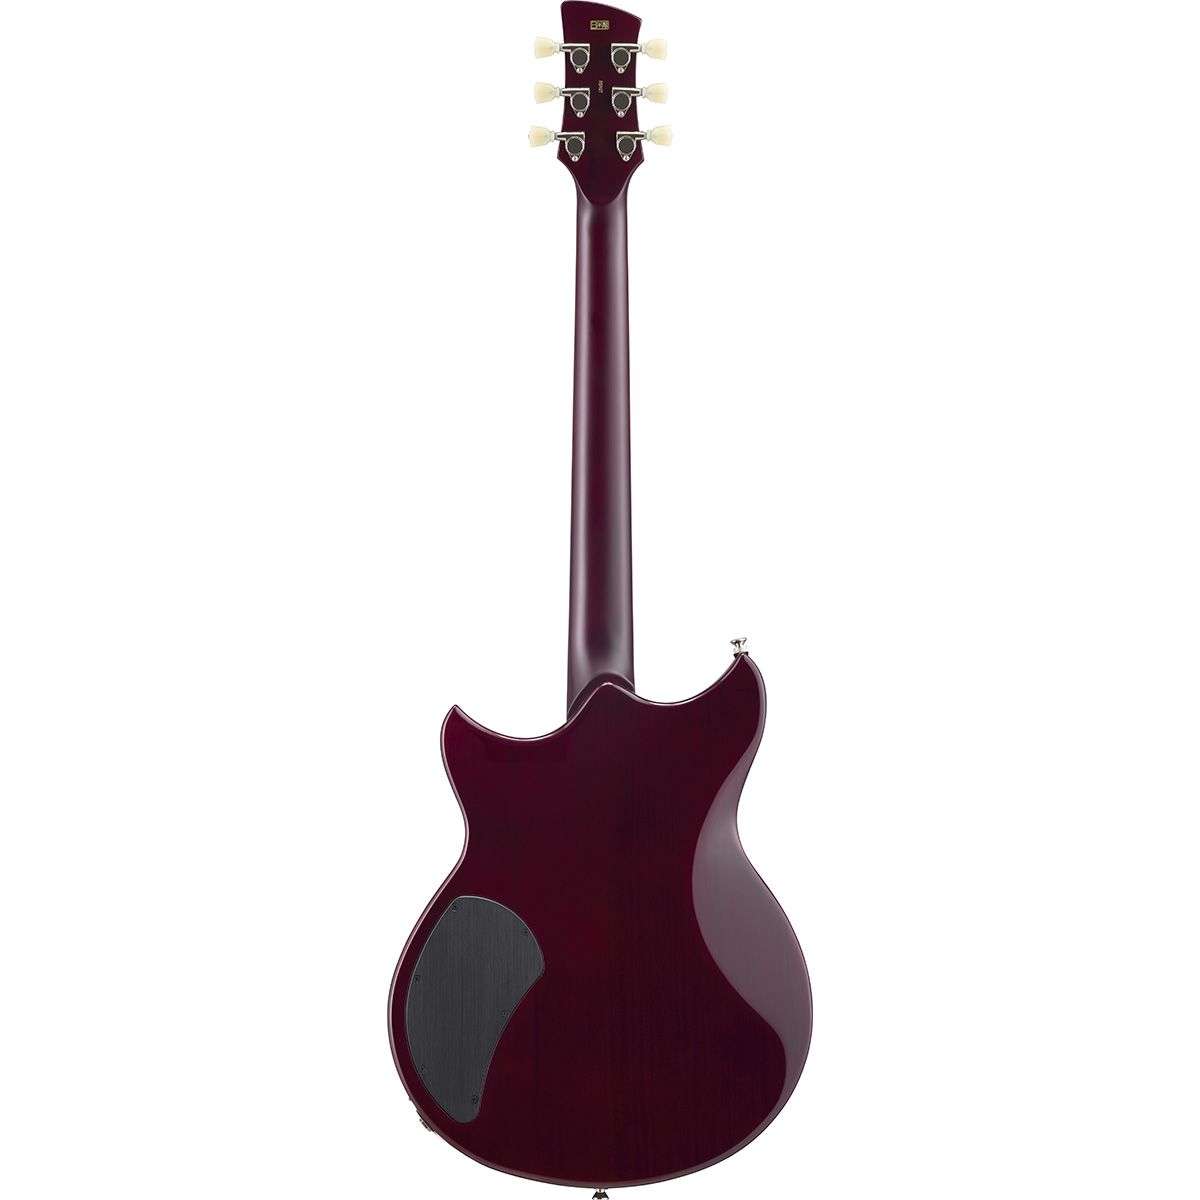 Yamaha MADE IN JAPAN RSP02T Revstar II Professional Series Electric Guitar with Case - Sunset Burst RSP02T SSB